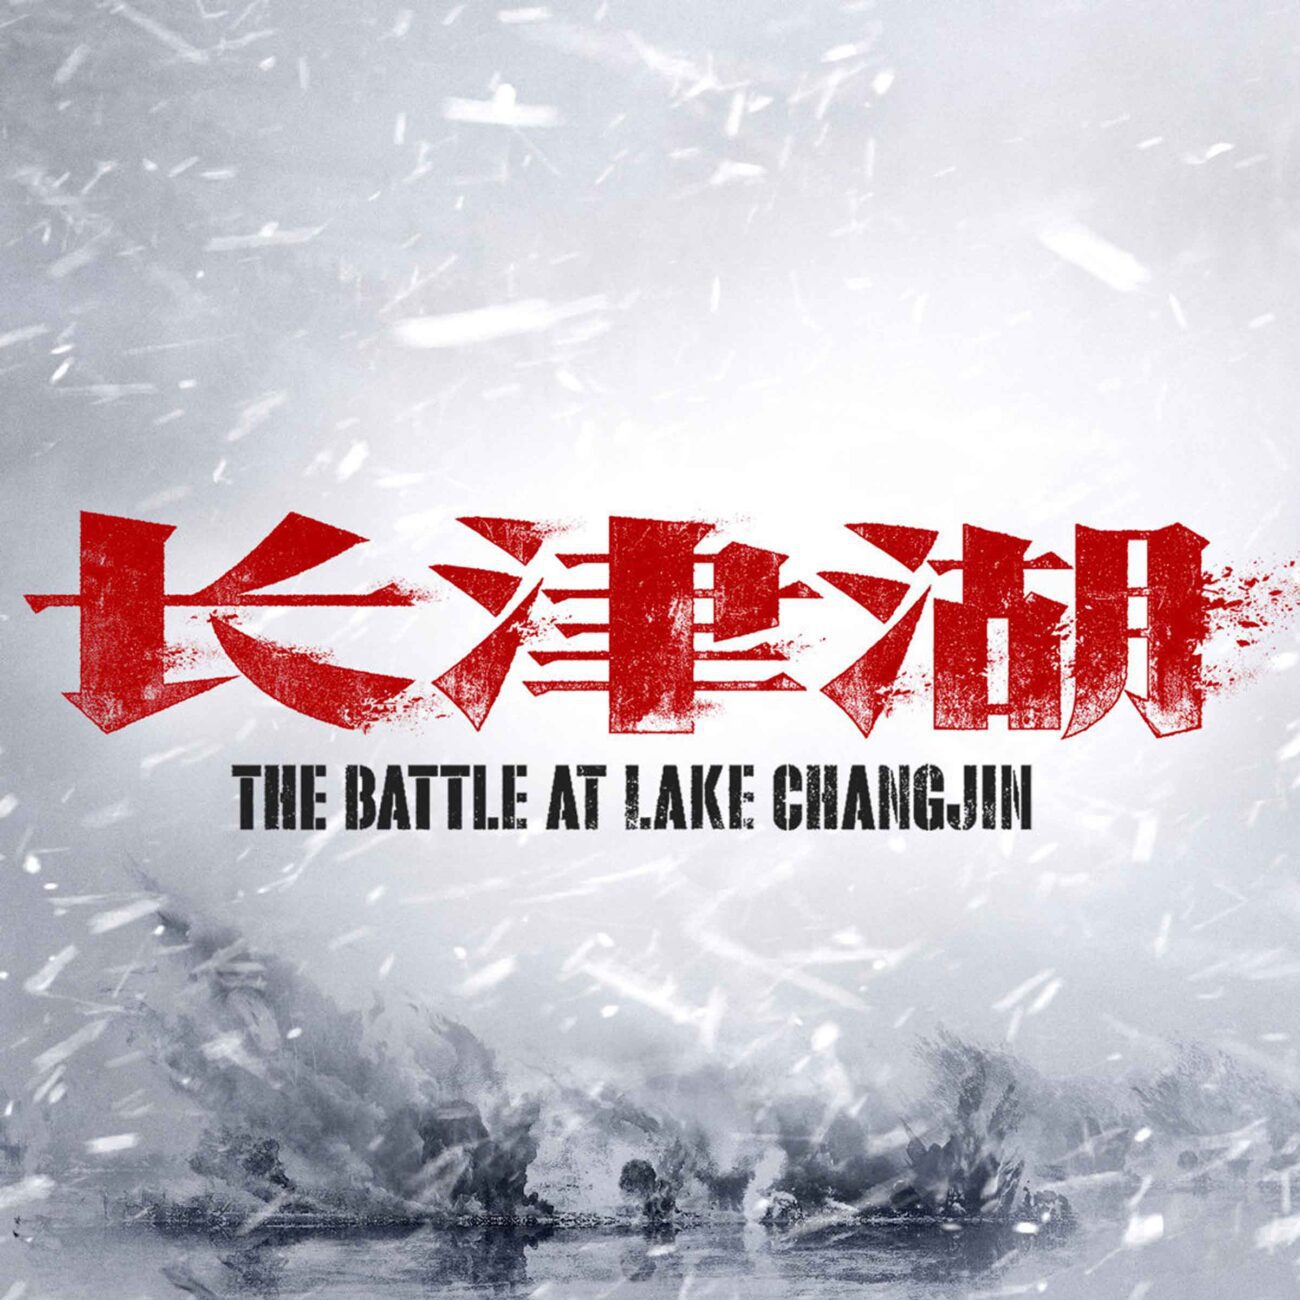 'The Battle At Lake Changjin' is a Chinese action blockbuster. Find out how to stream the anticipated film online for free.